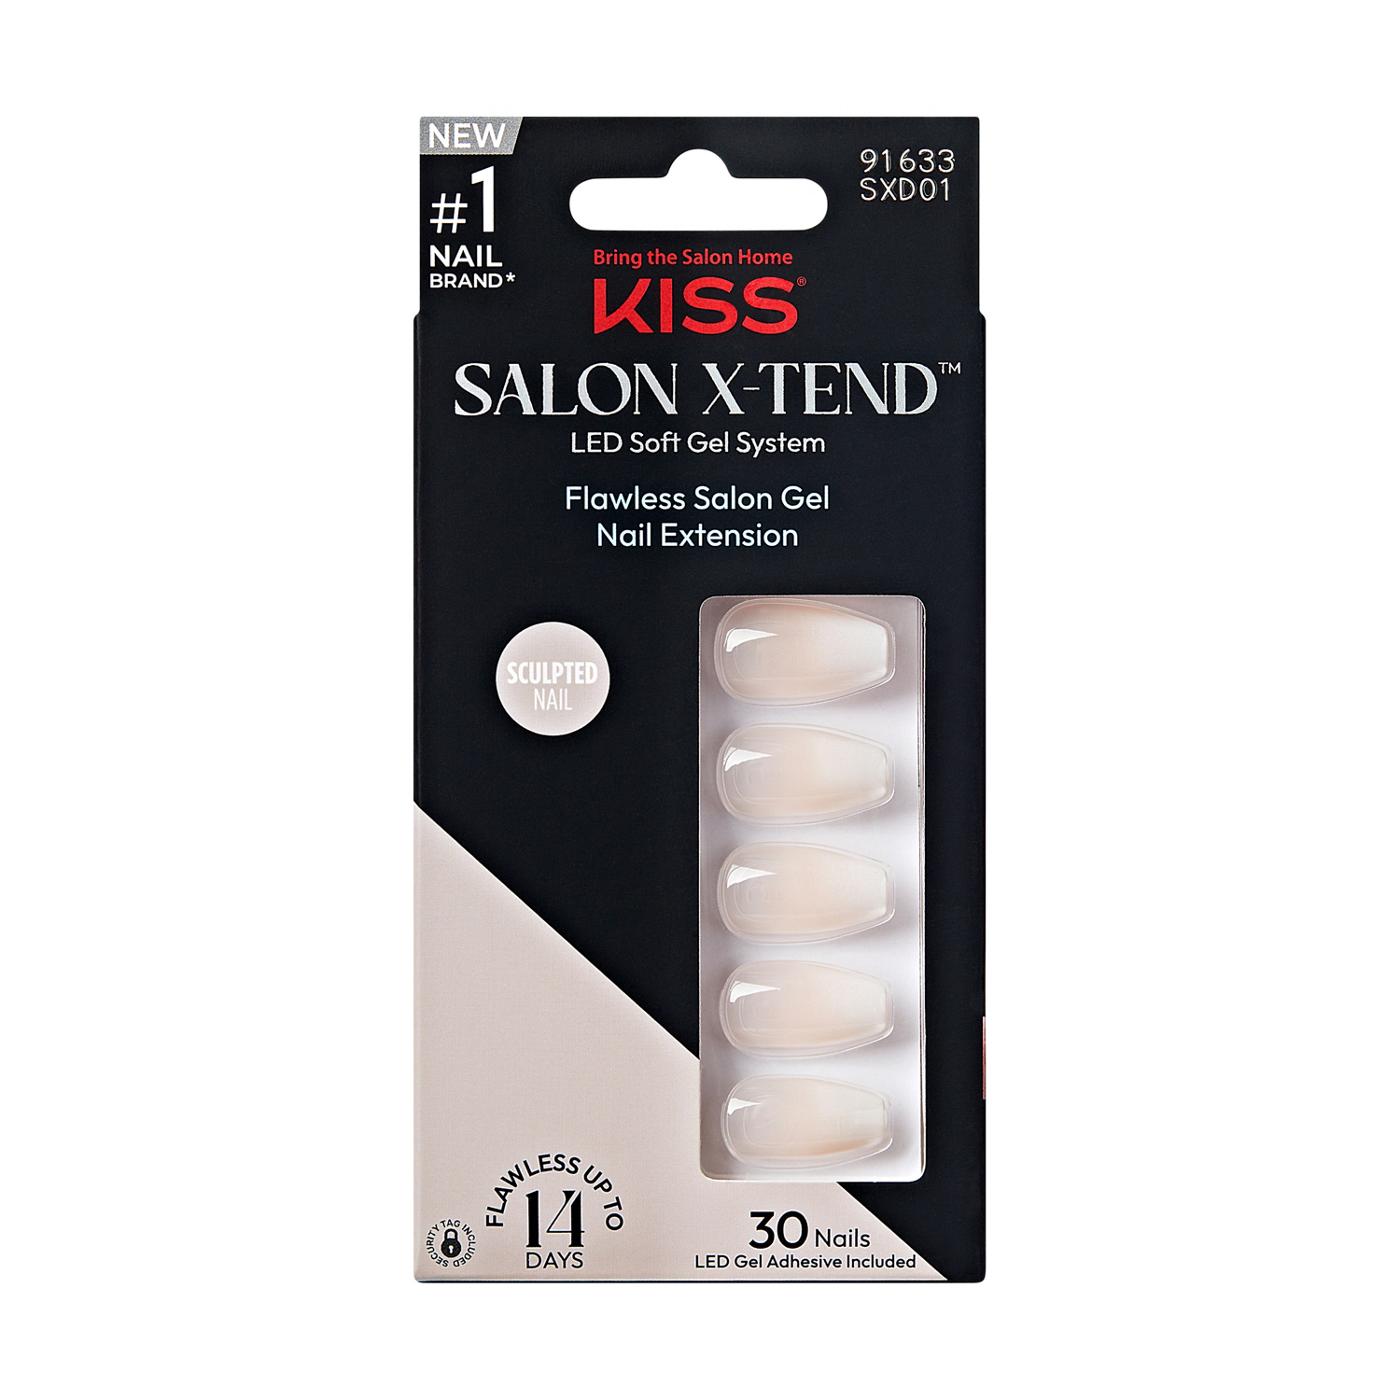 KISS Salon X-Tend LED Soft Gel System - Words; image 1 of 7